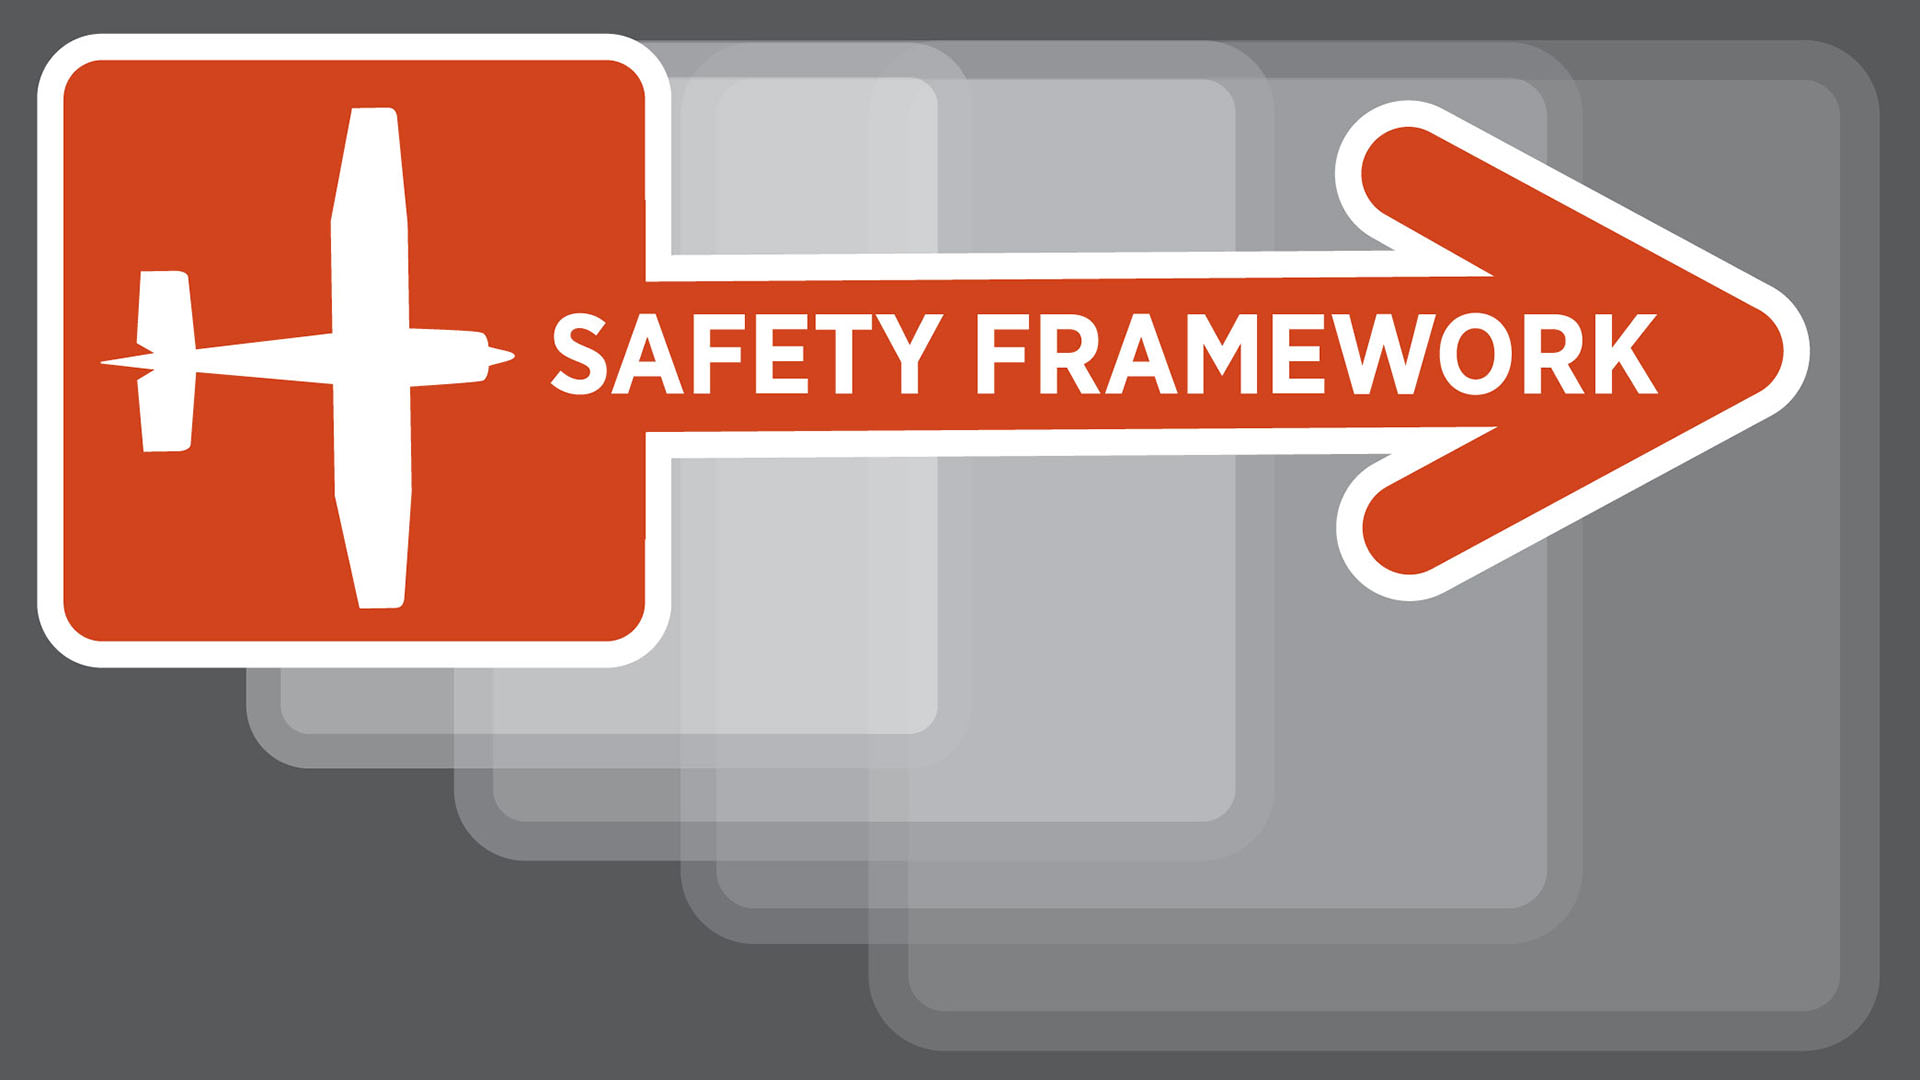 Air Safety Institute's Scalable Safety Framework